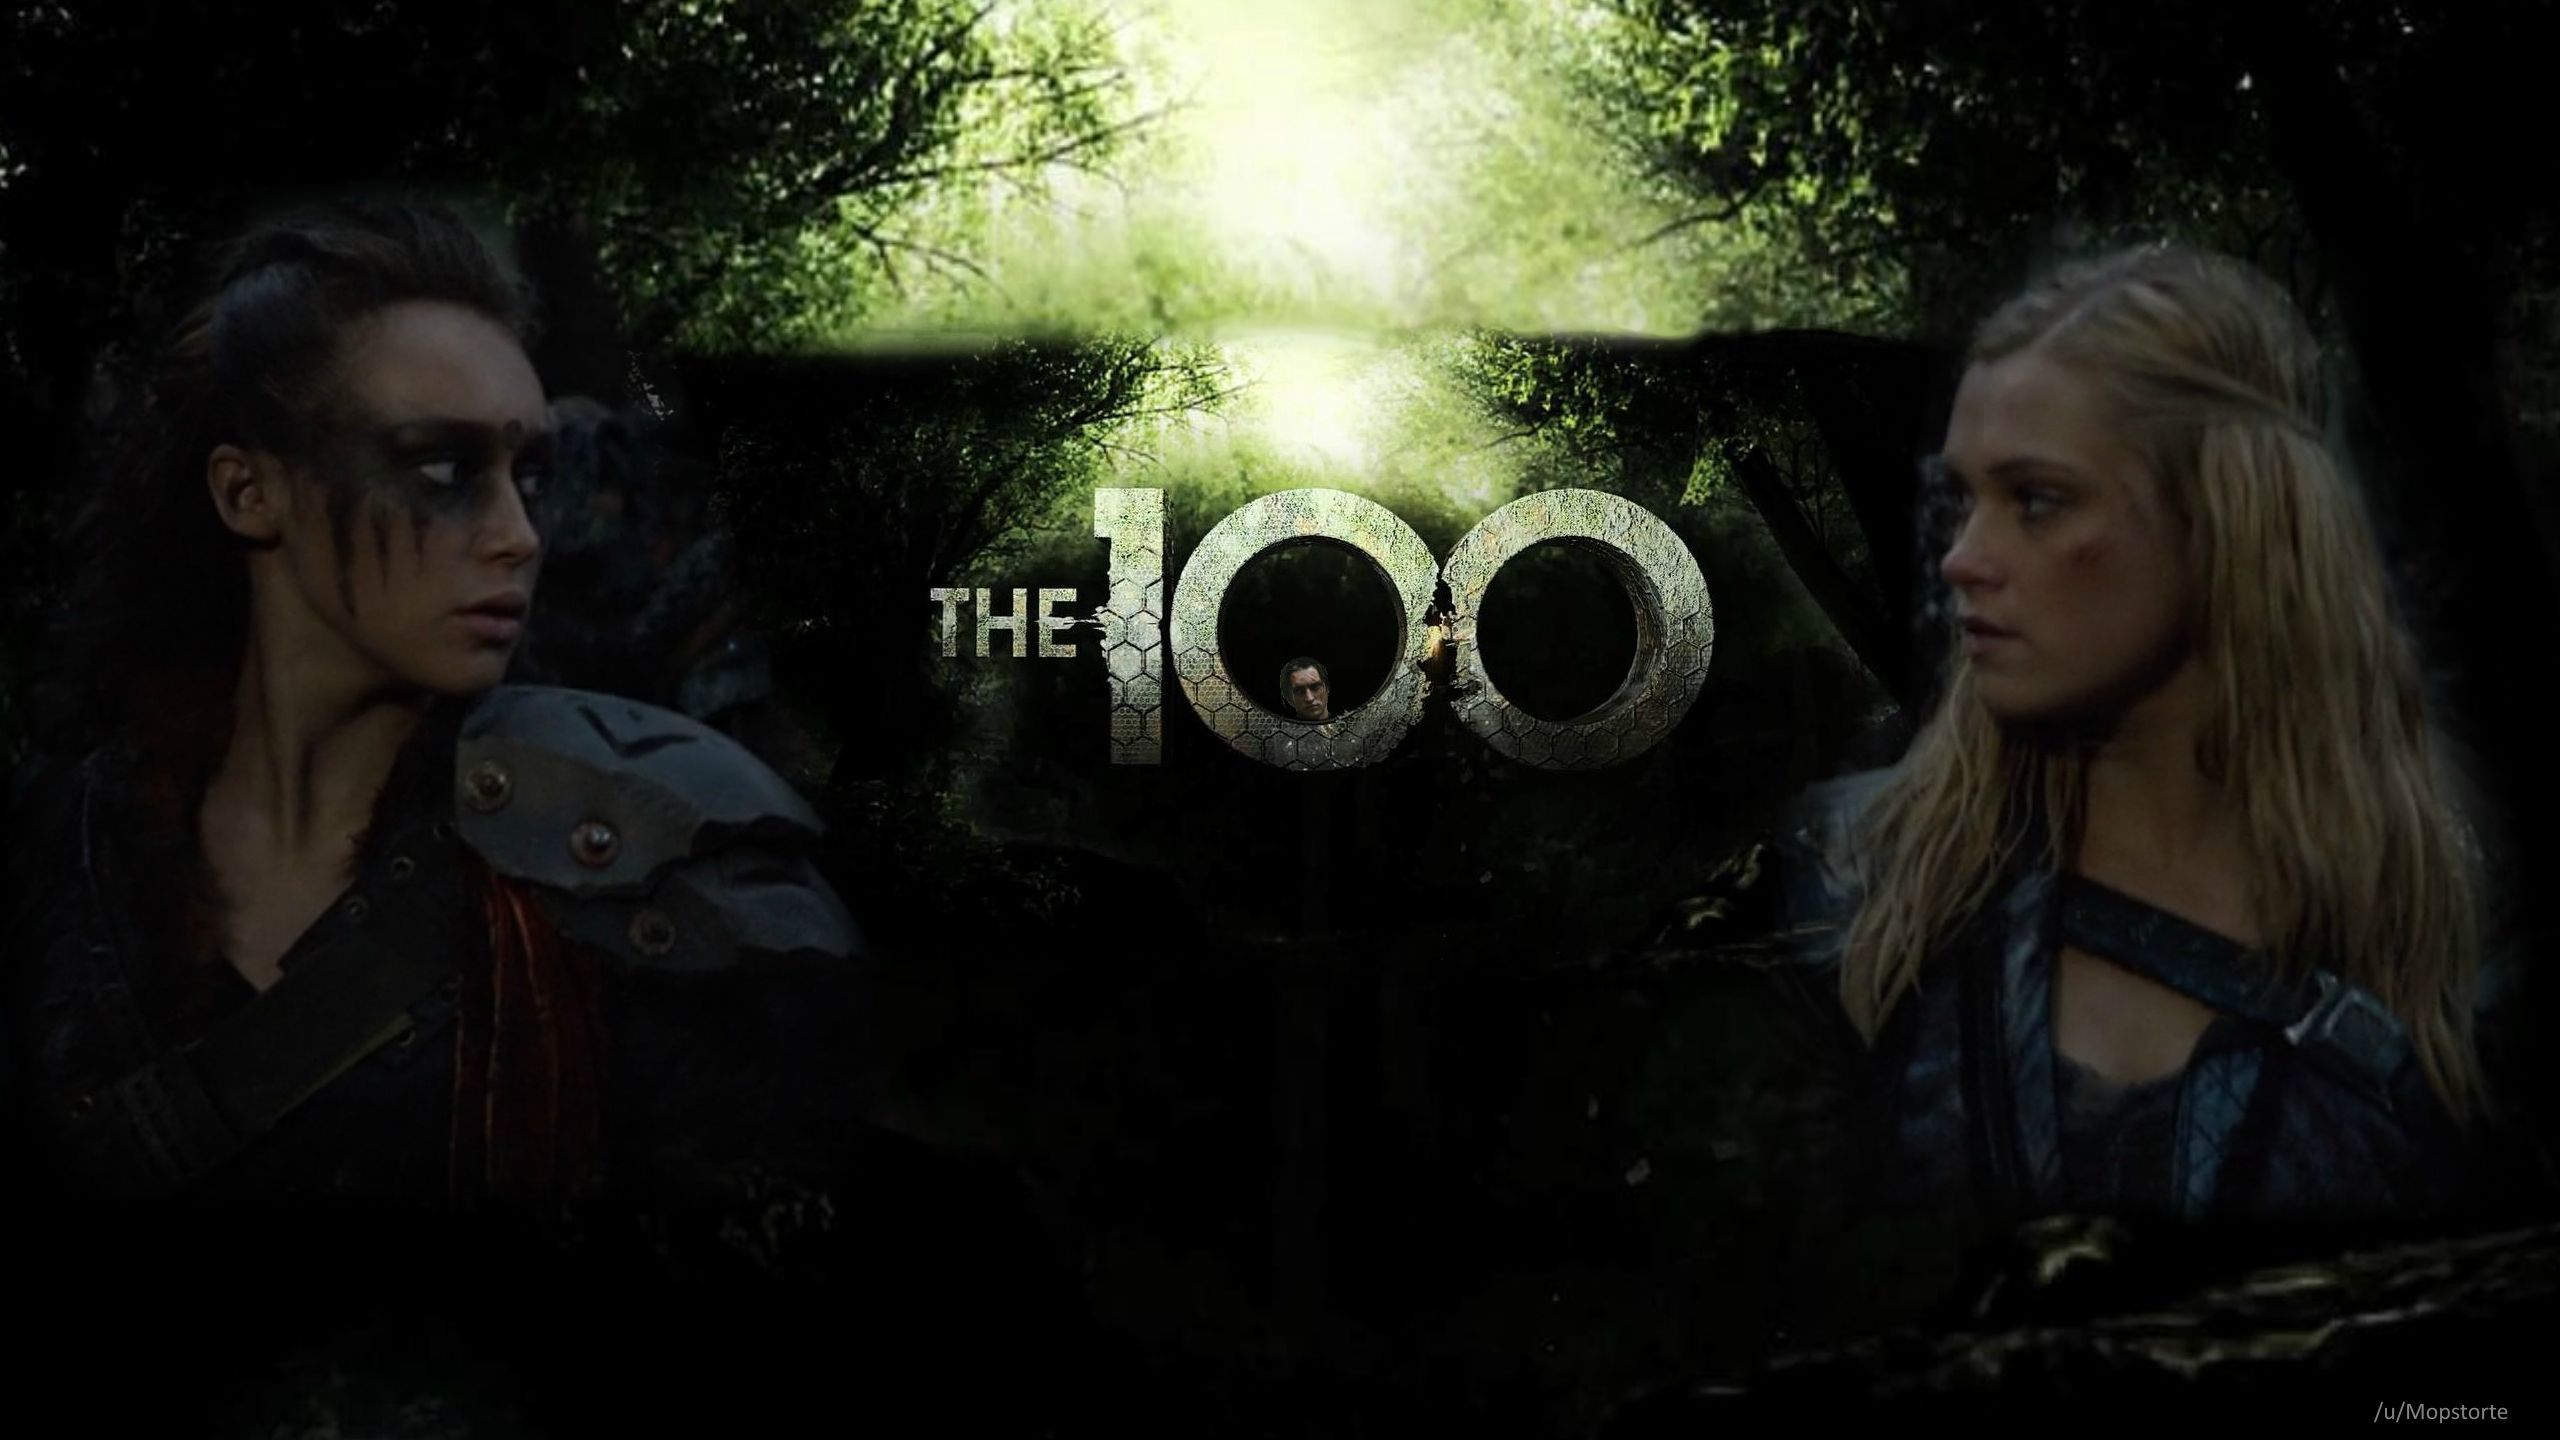 A subverse for all the fans of the tv show The 100